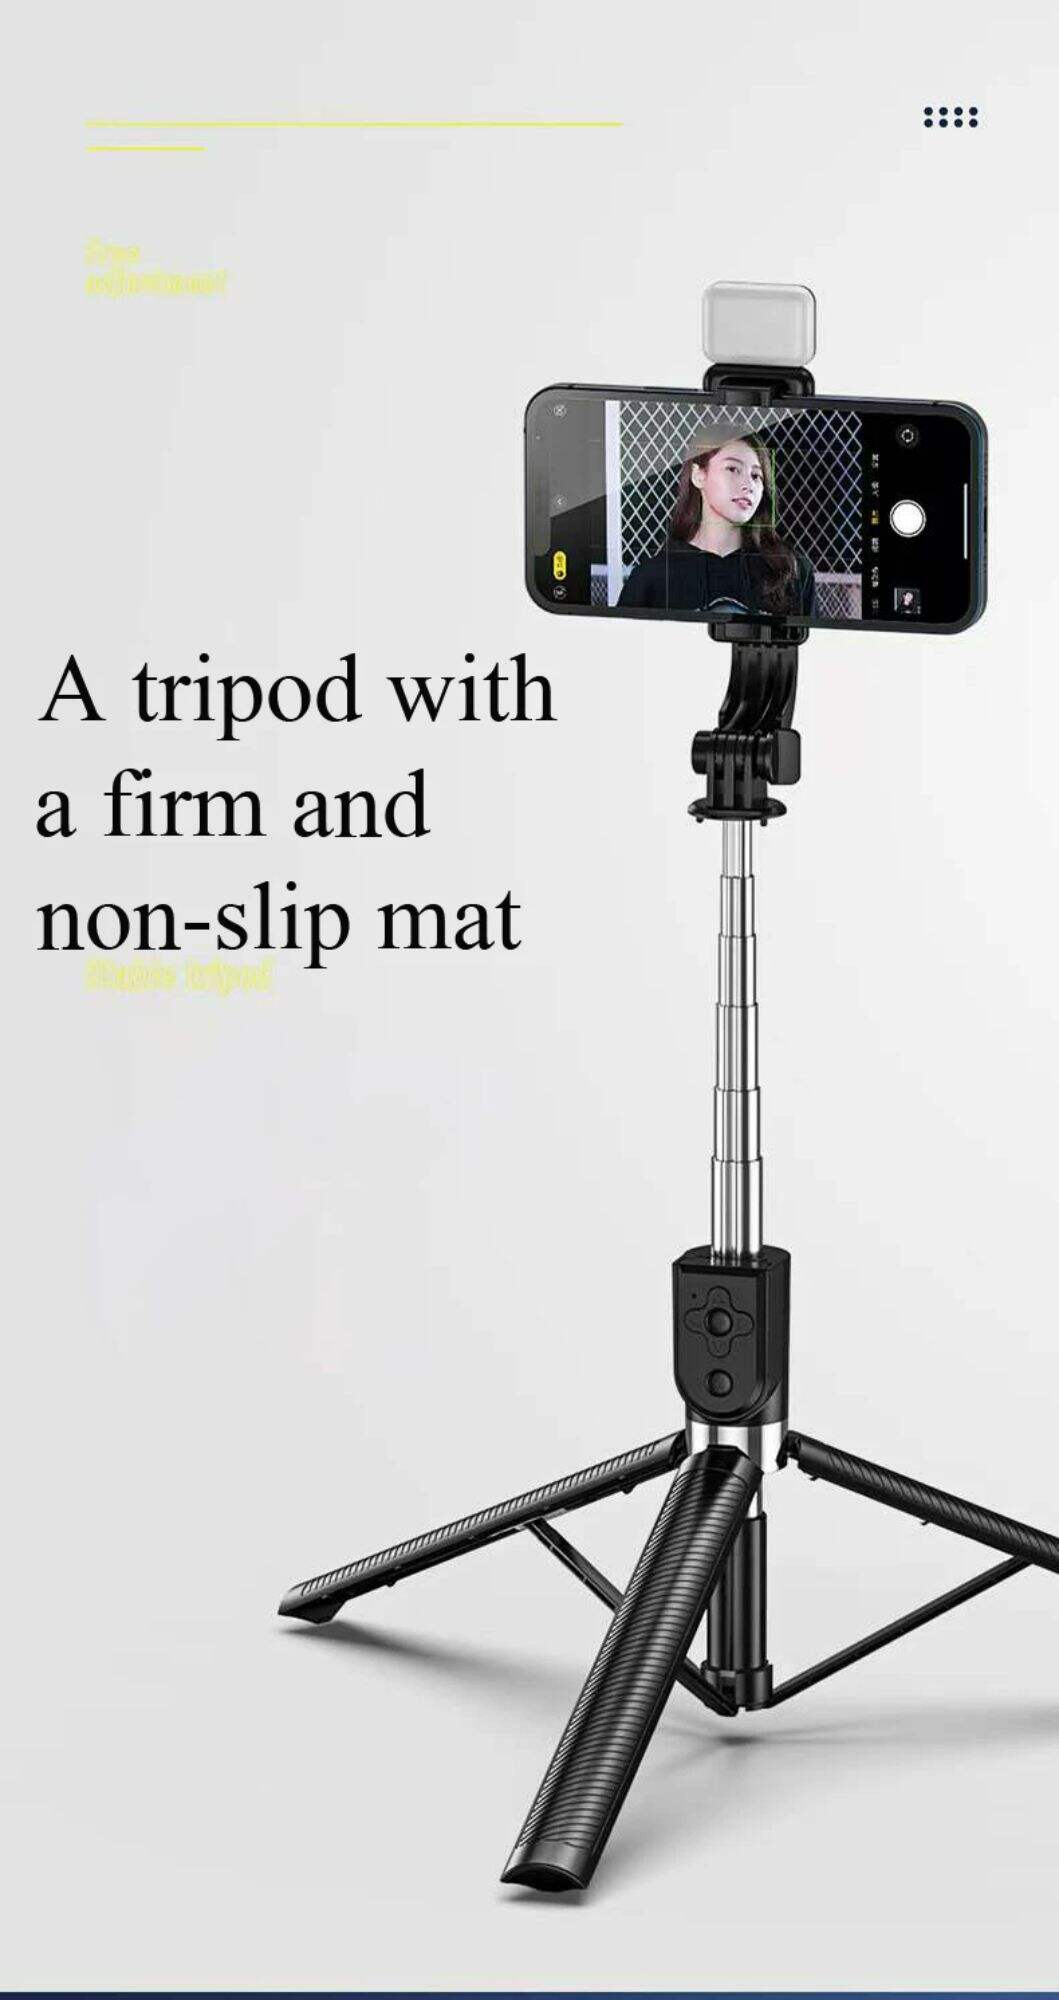 HSU Z6 1.7M Long Extended Blue tooth Wireless Live Broadcast Stream Stand Holder Tripod Selfie Stick For Smartphones